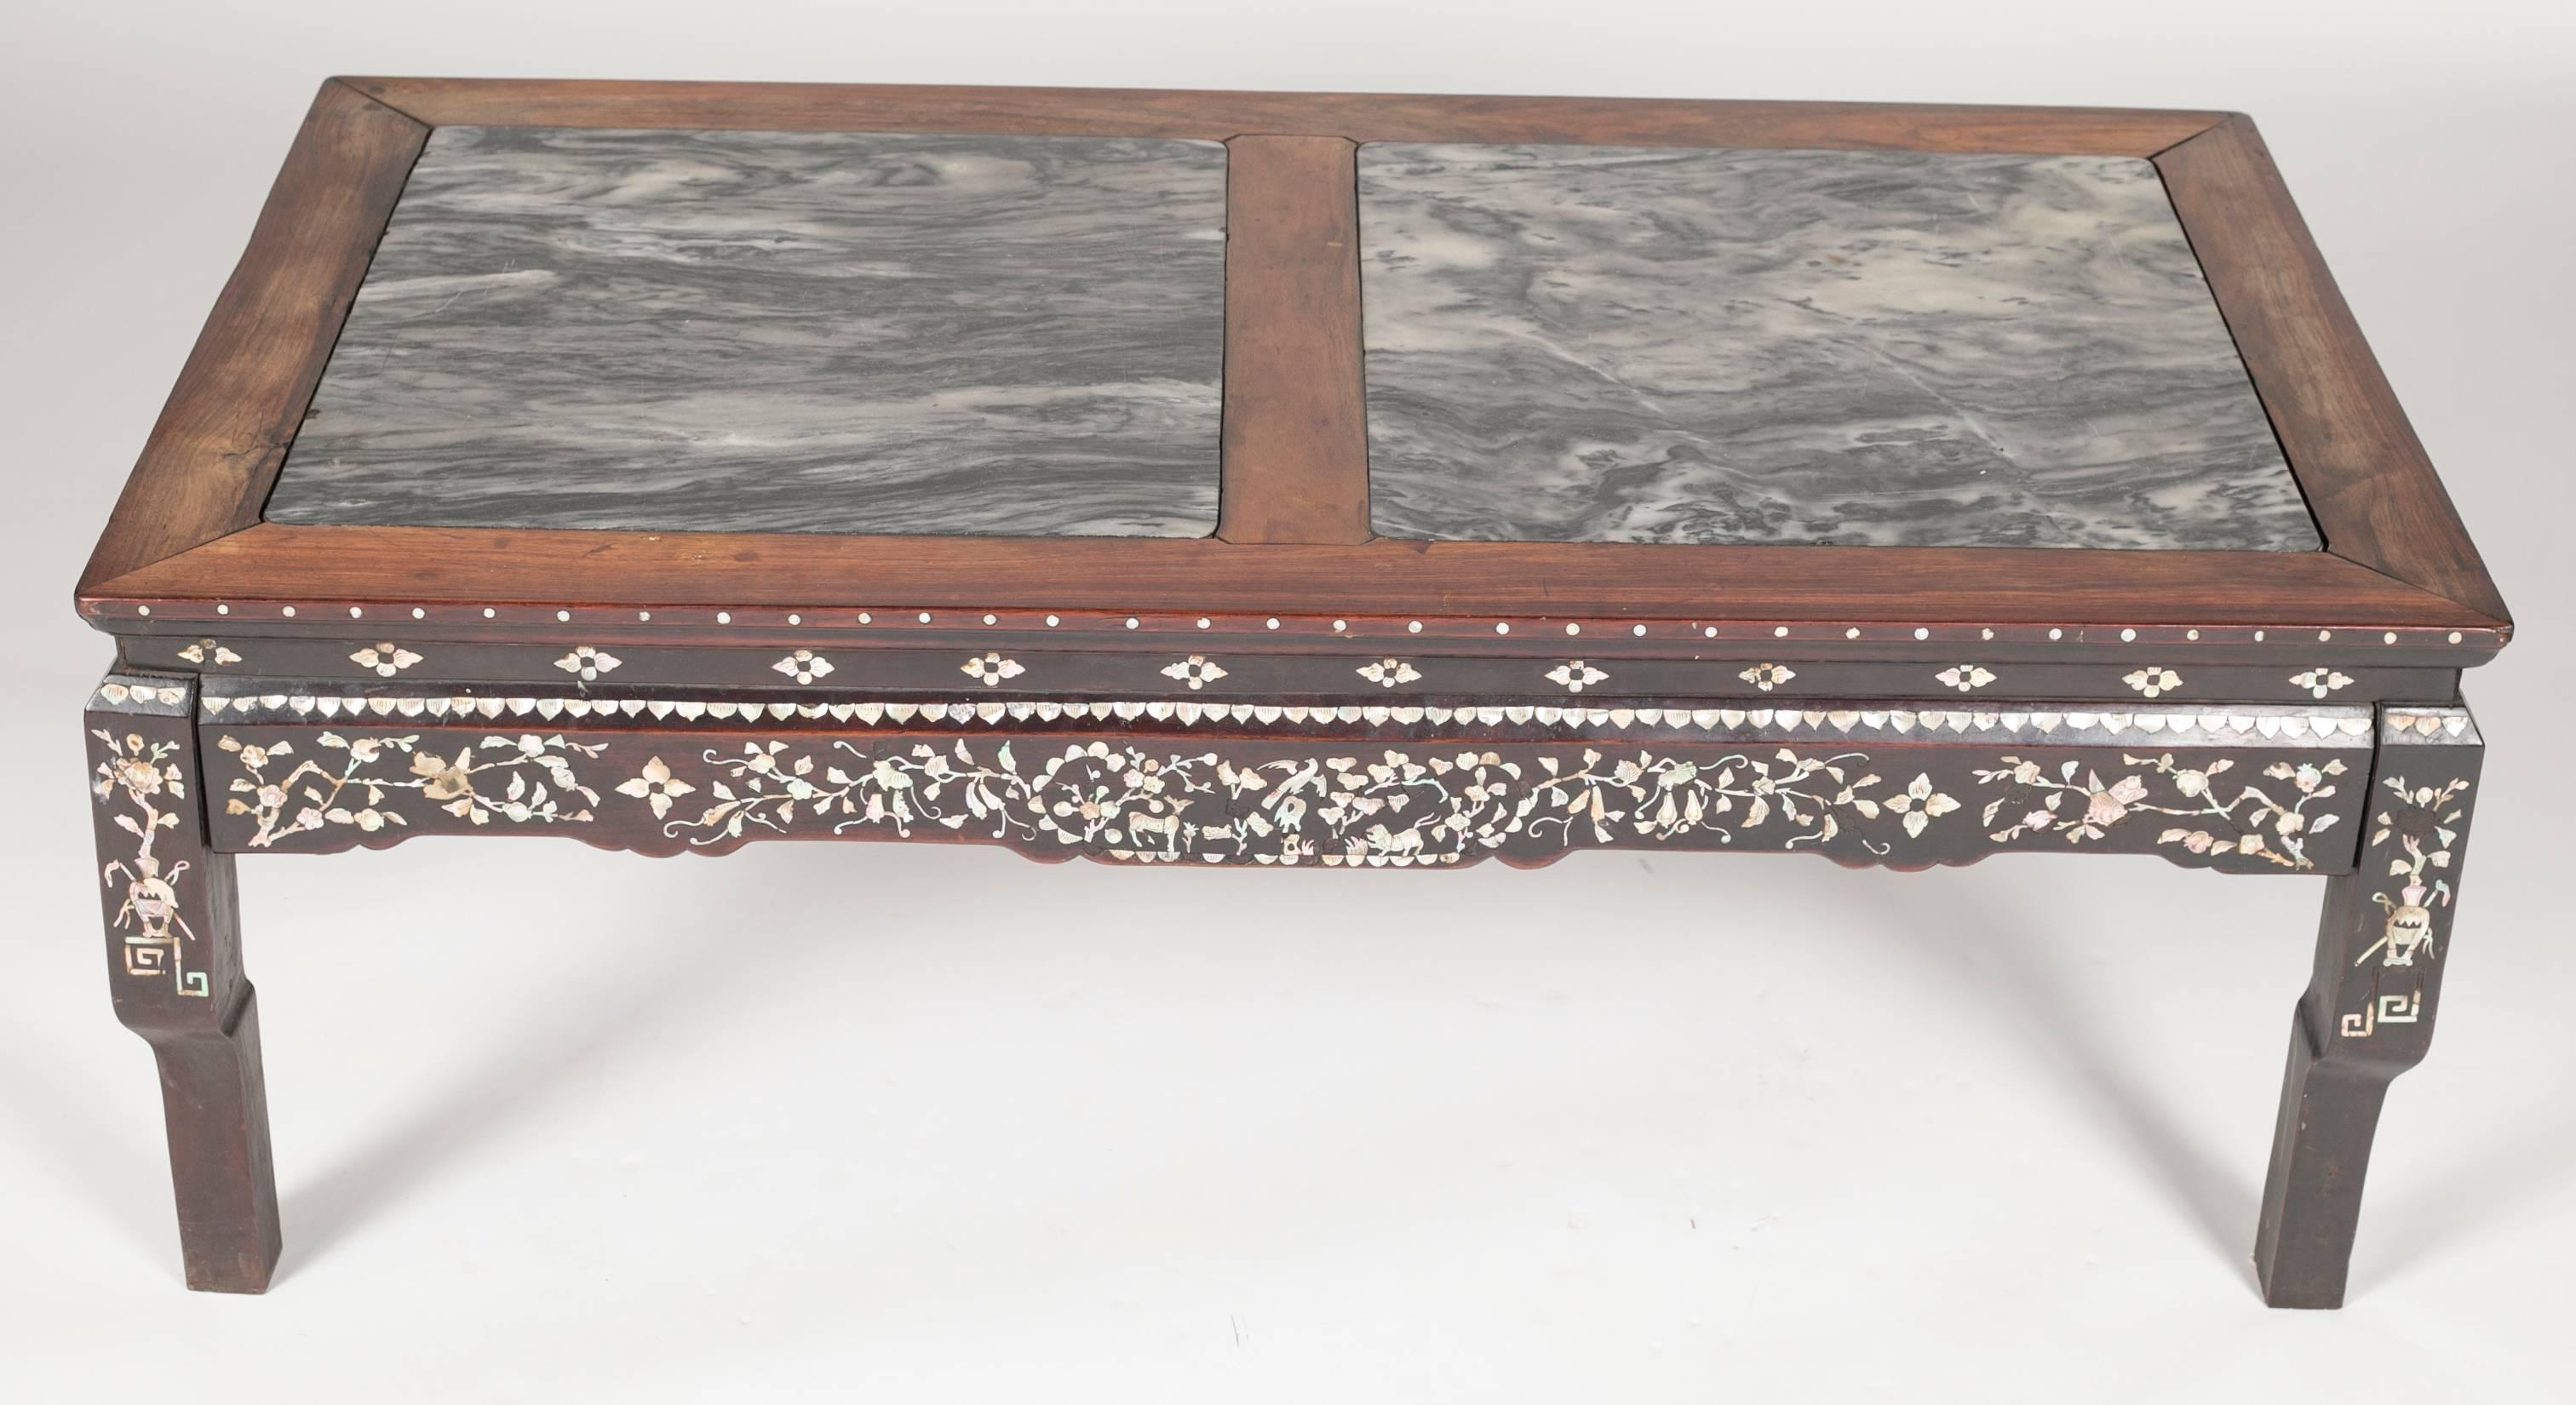 A hardwood and mother-of-pearl inlay Chinese low table with marble tops.